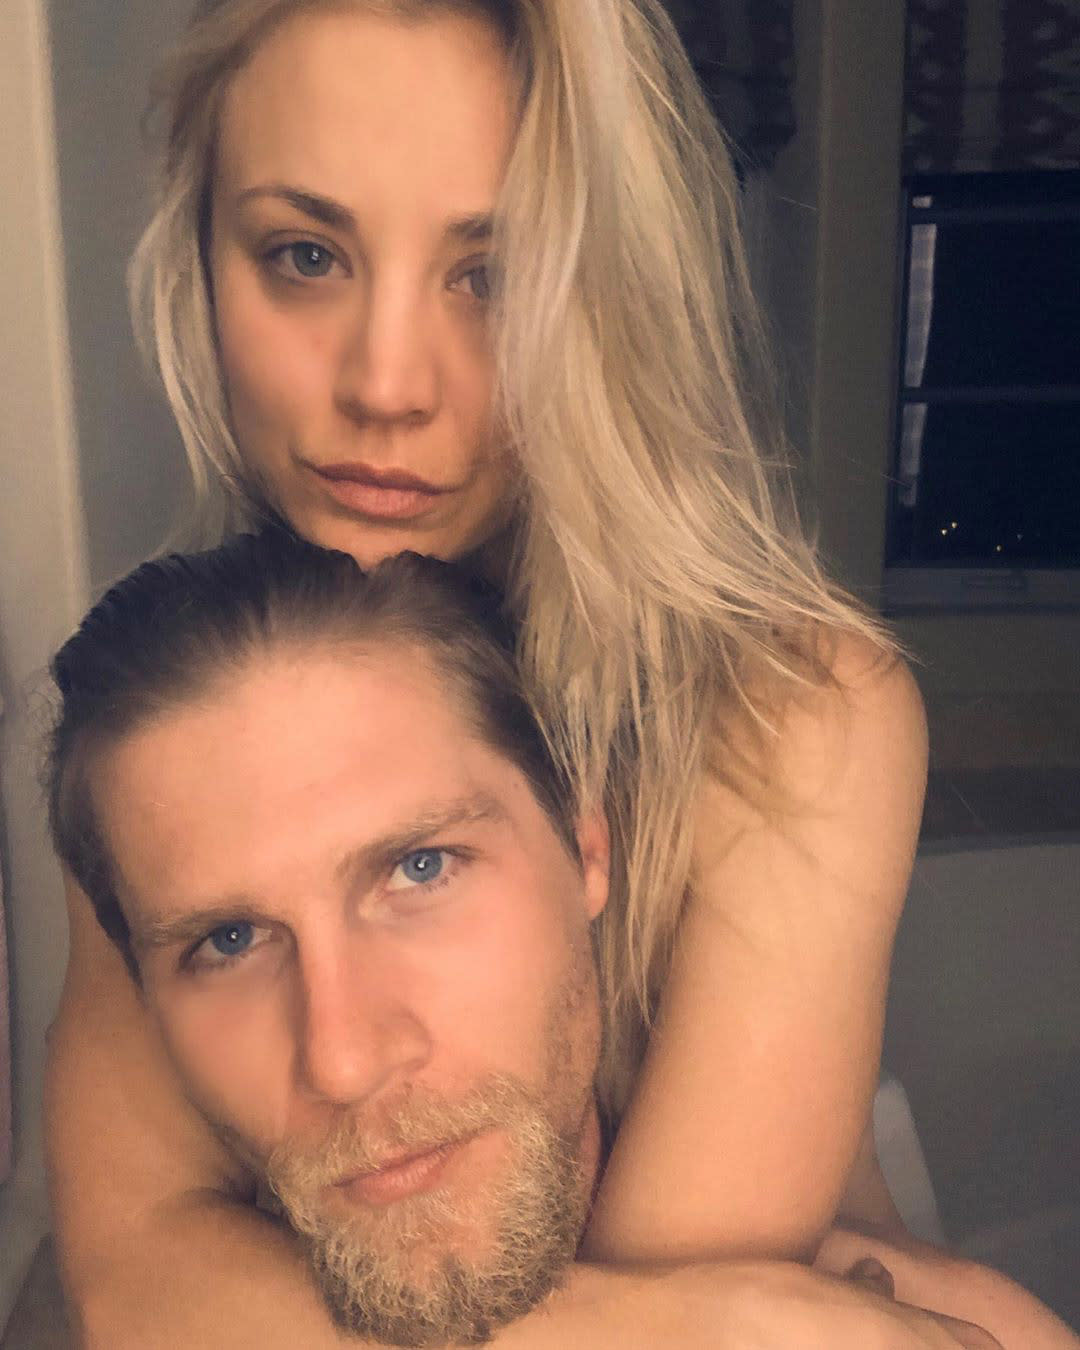 Kaley Cuoco - Kaley Cuoco's Husband Ruins Sexy Photo by Saying They Look Like Siblings:  'Moment Over'